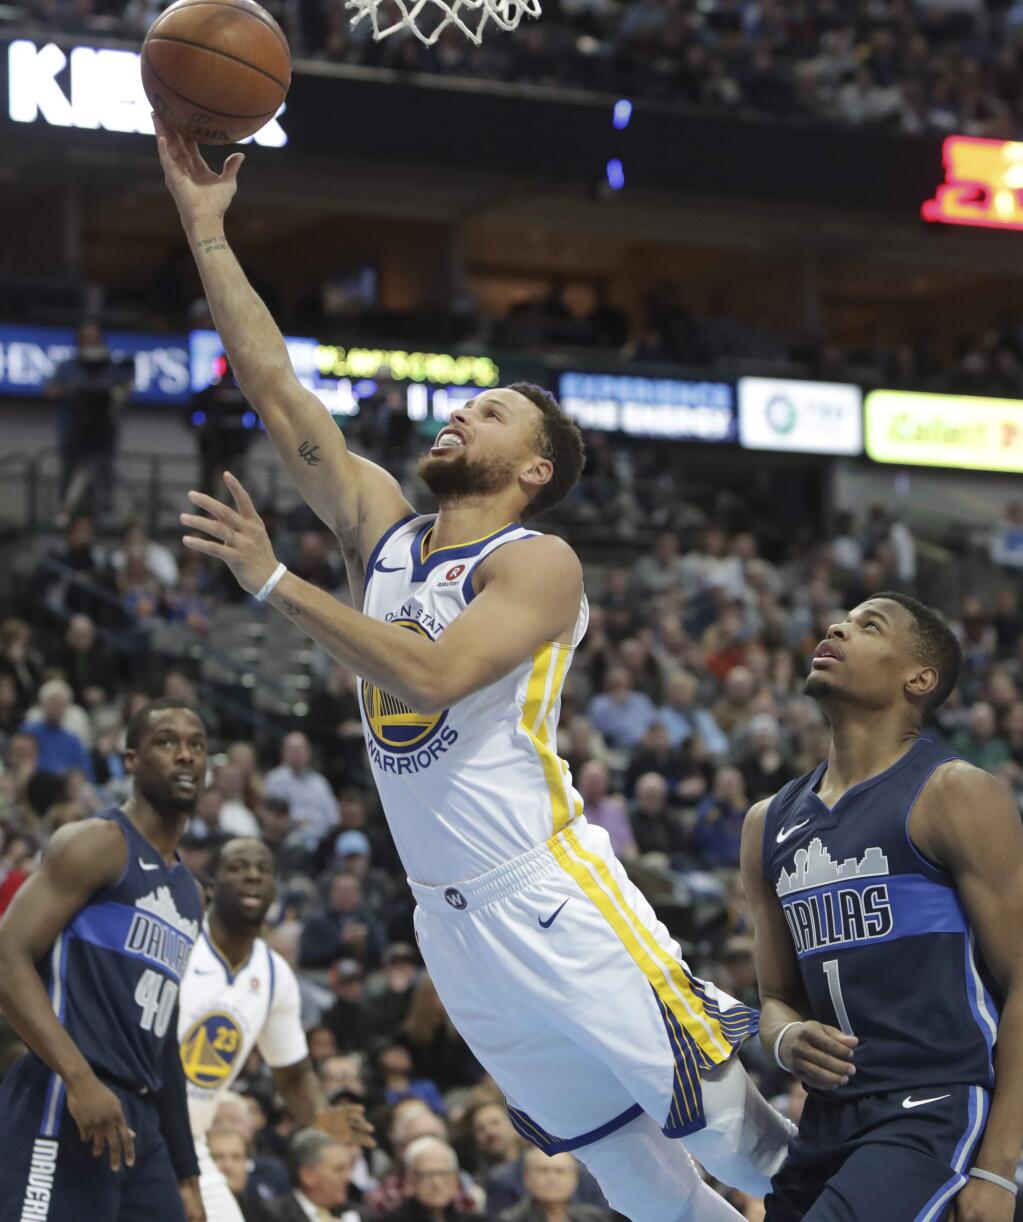 Golden State Warriors guard Stephen Curry (30) drives past Dallas Mavericks guard Dennis Smith Jr. (1) during the first half of an NBA basketball game in Dallas, Wednesday, Jan. 3, 2018. (AP Photo/LM Otero)